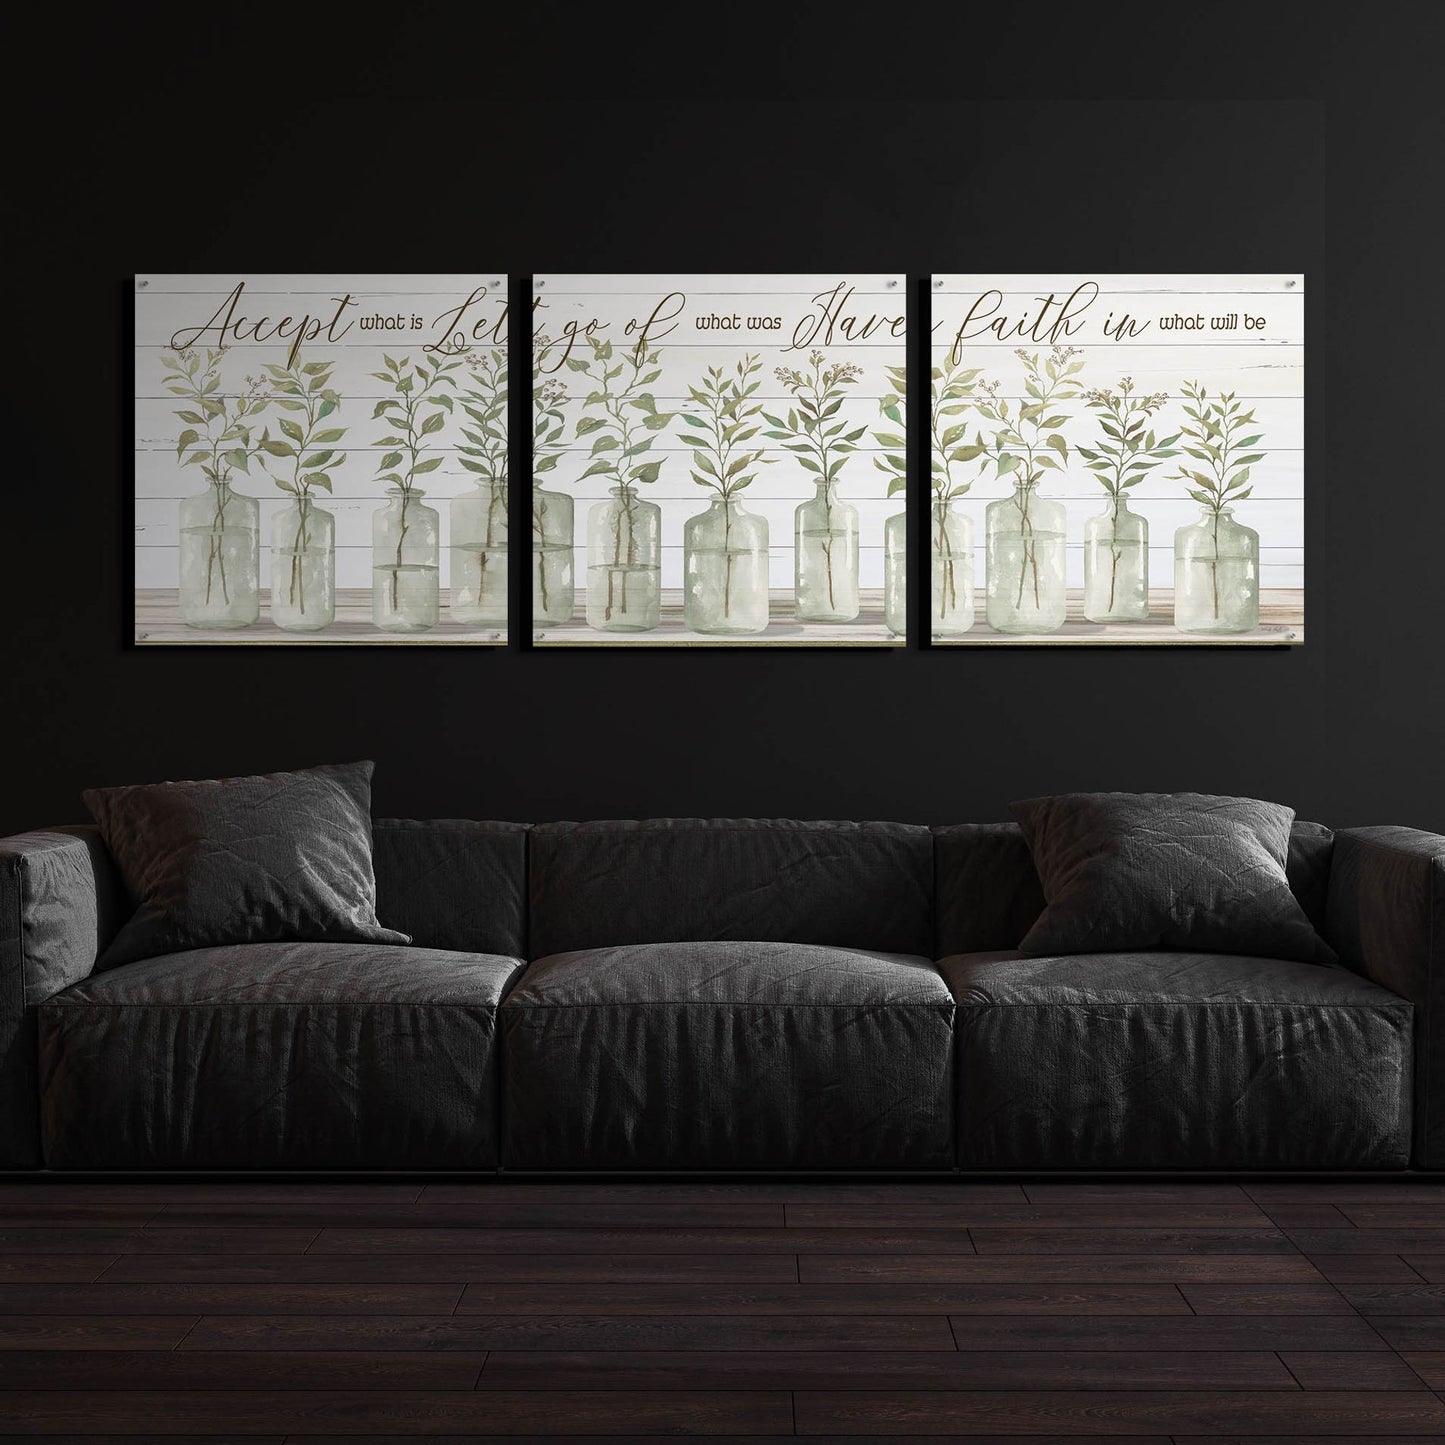 Epic Art 'Accept What Is' by Cindy Jacobs, Acrylic Glass Wall Art, 3 Piece Set,108x36